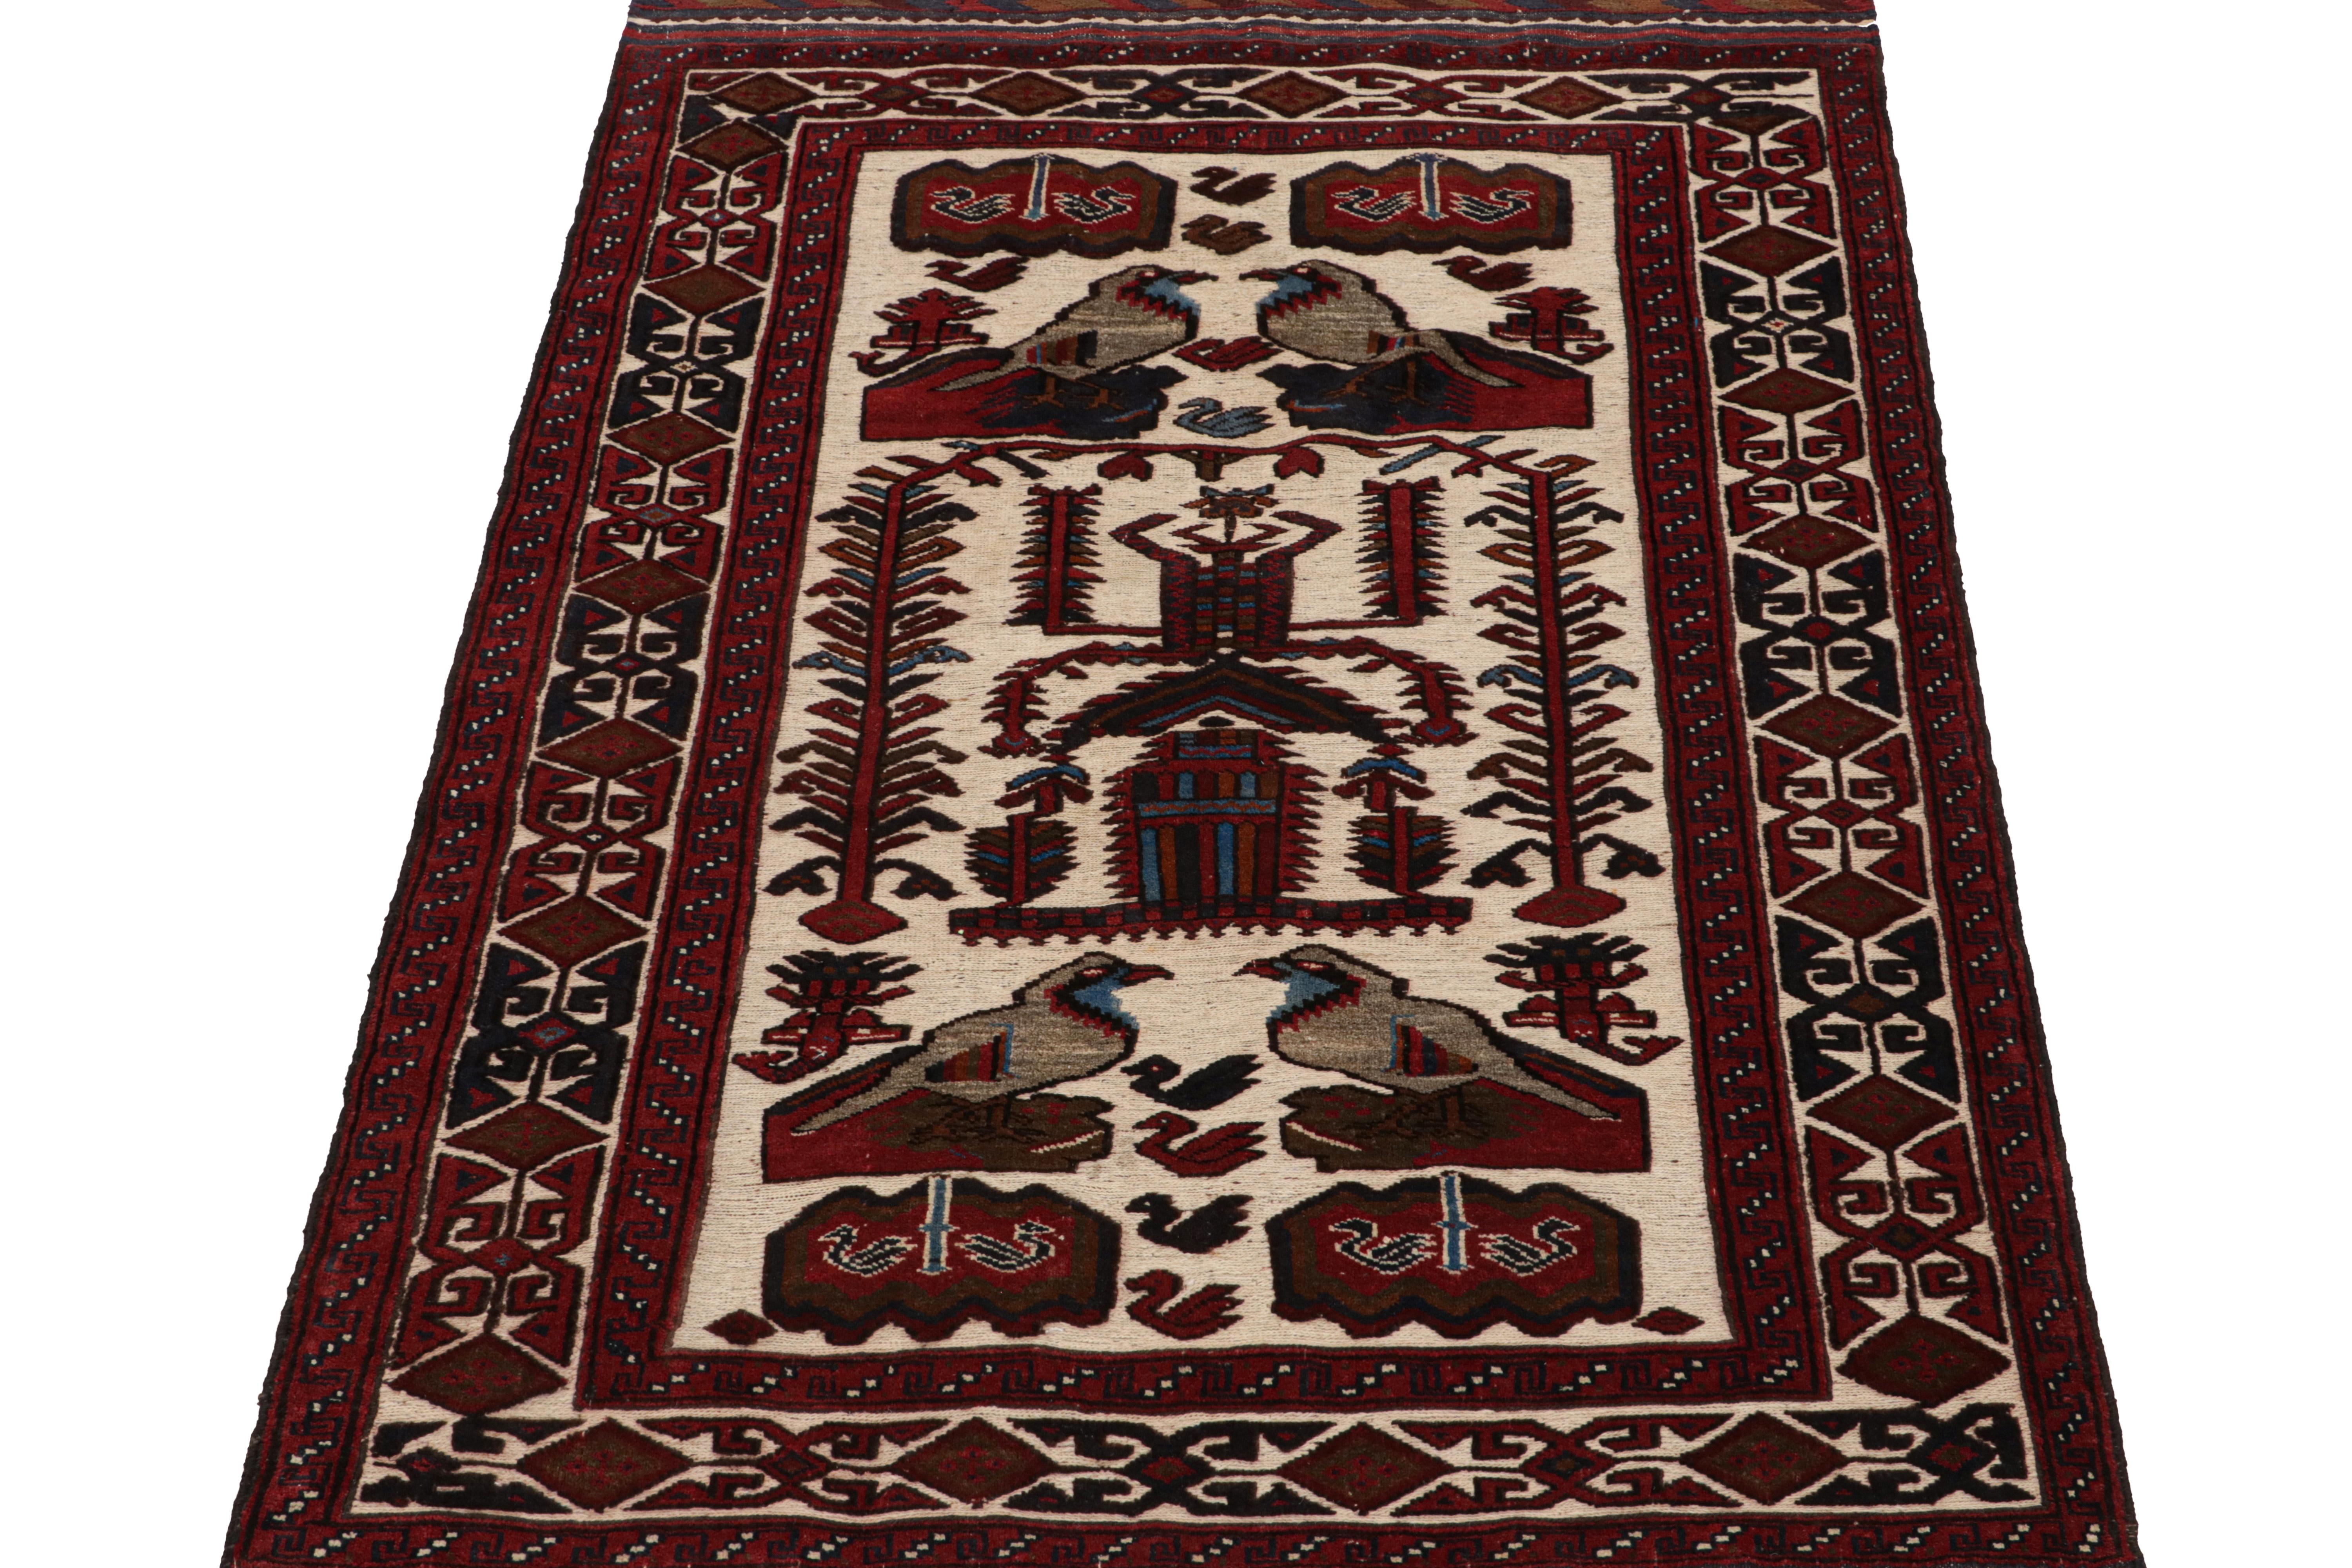 Tribal Rug & Kilim’s Persian Barjasta style rug in Beige & Red with Bird Pictorials  For Sale